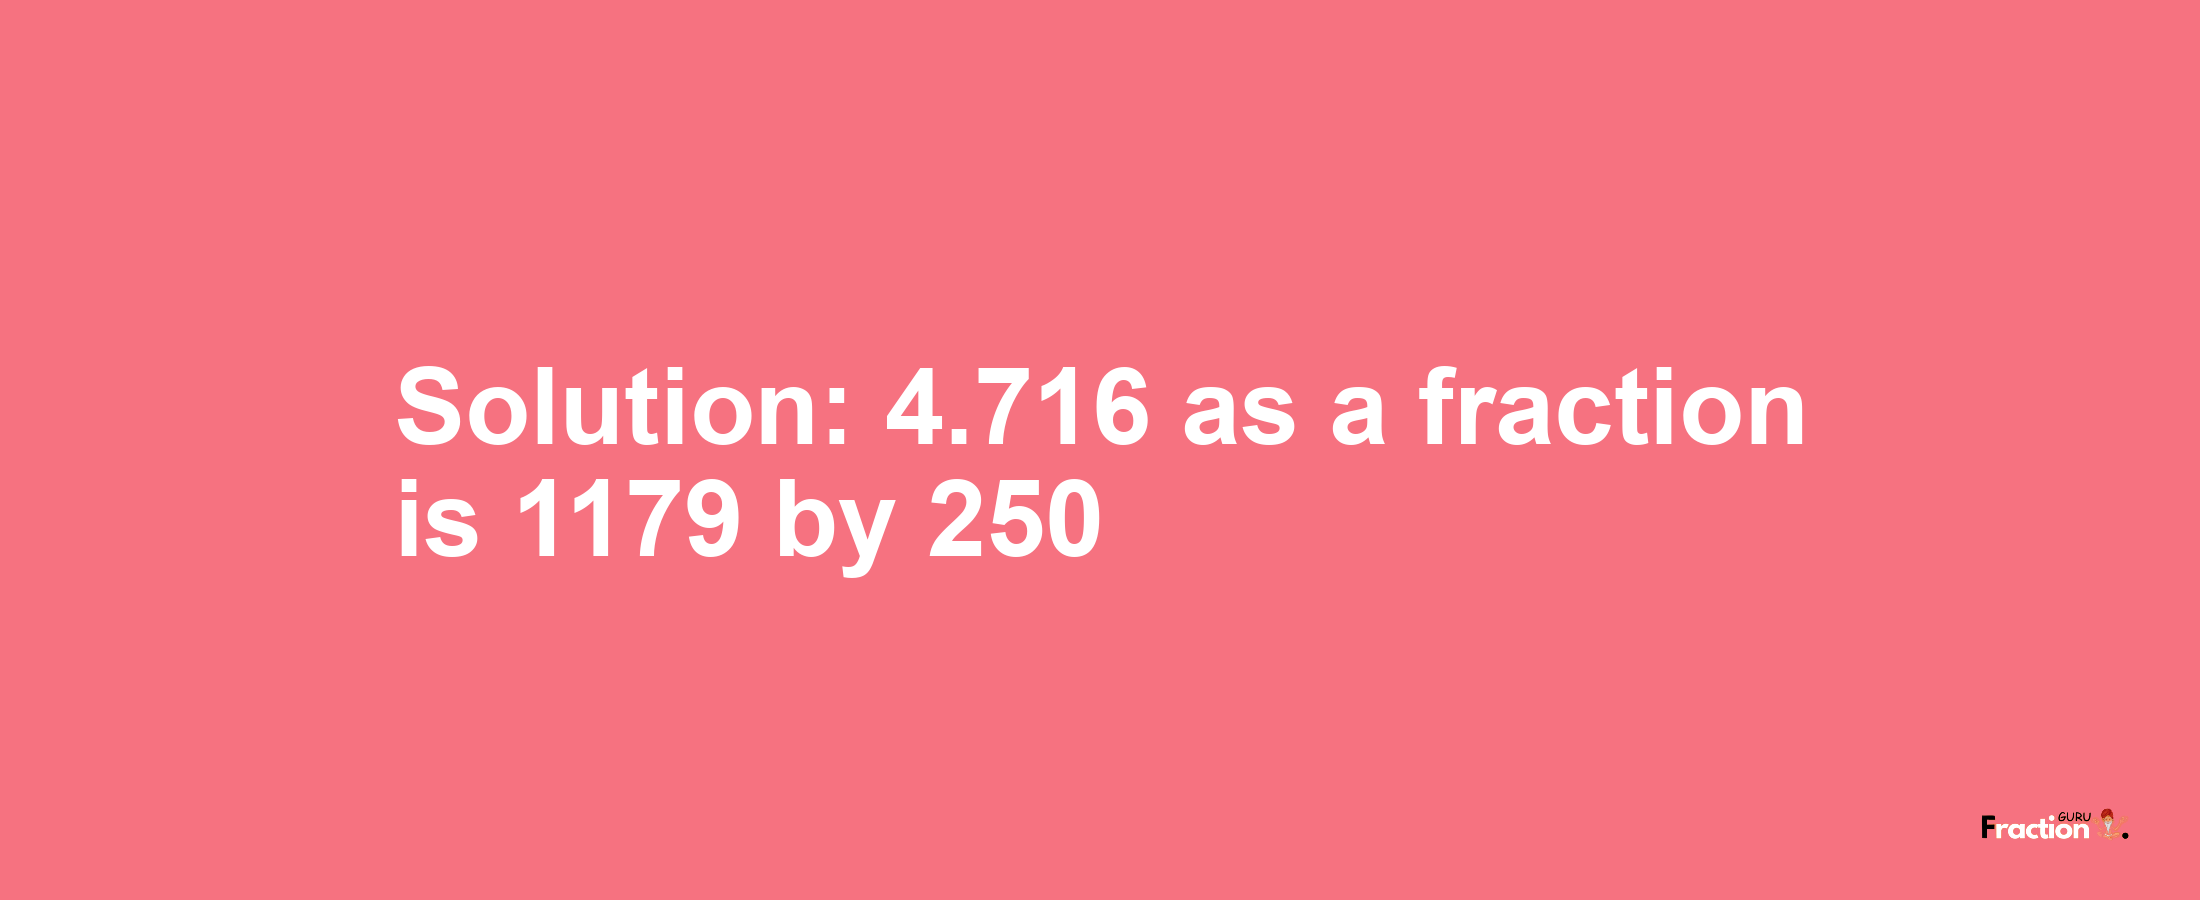 Solution:4.716 as a fraction is 1179/250